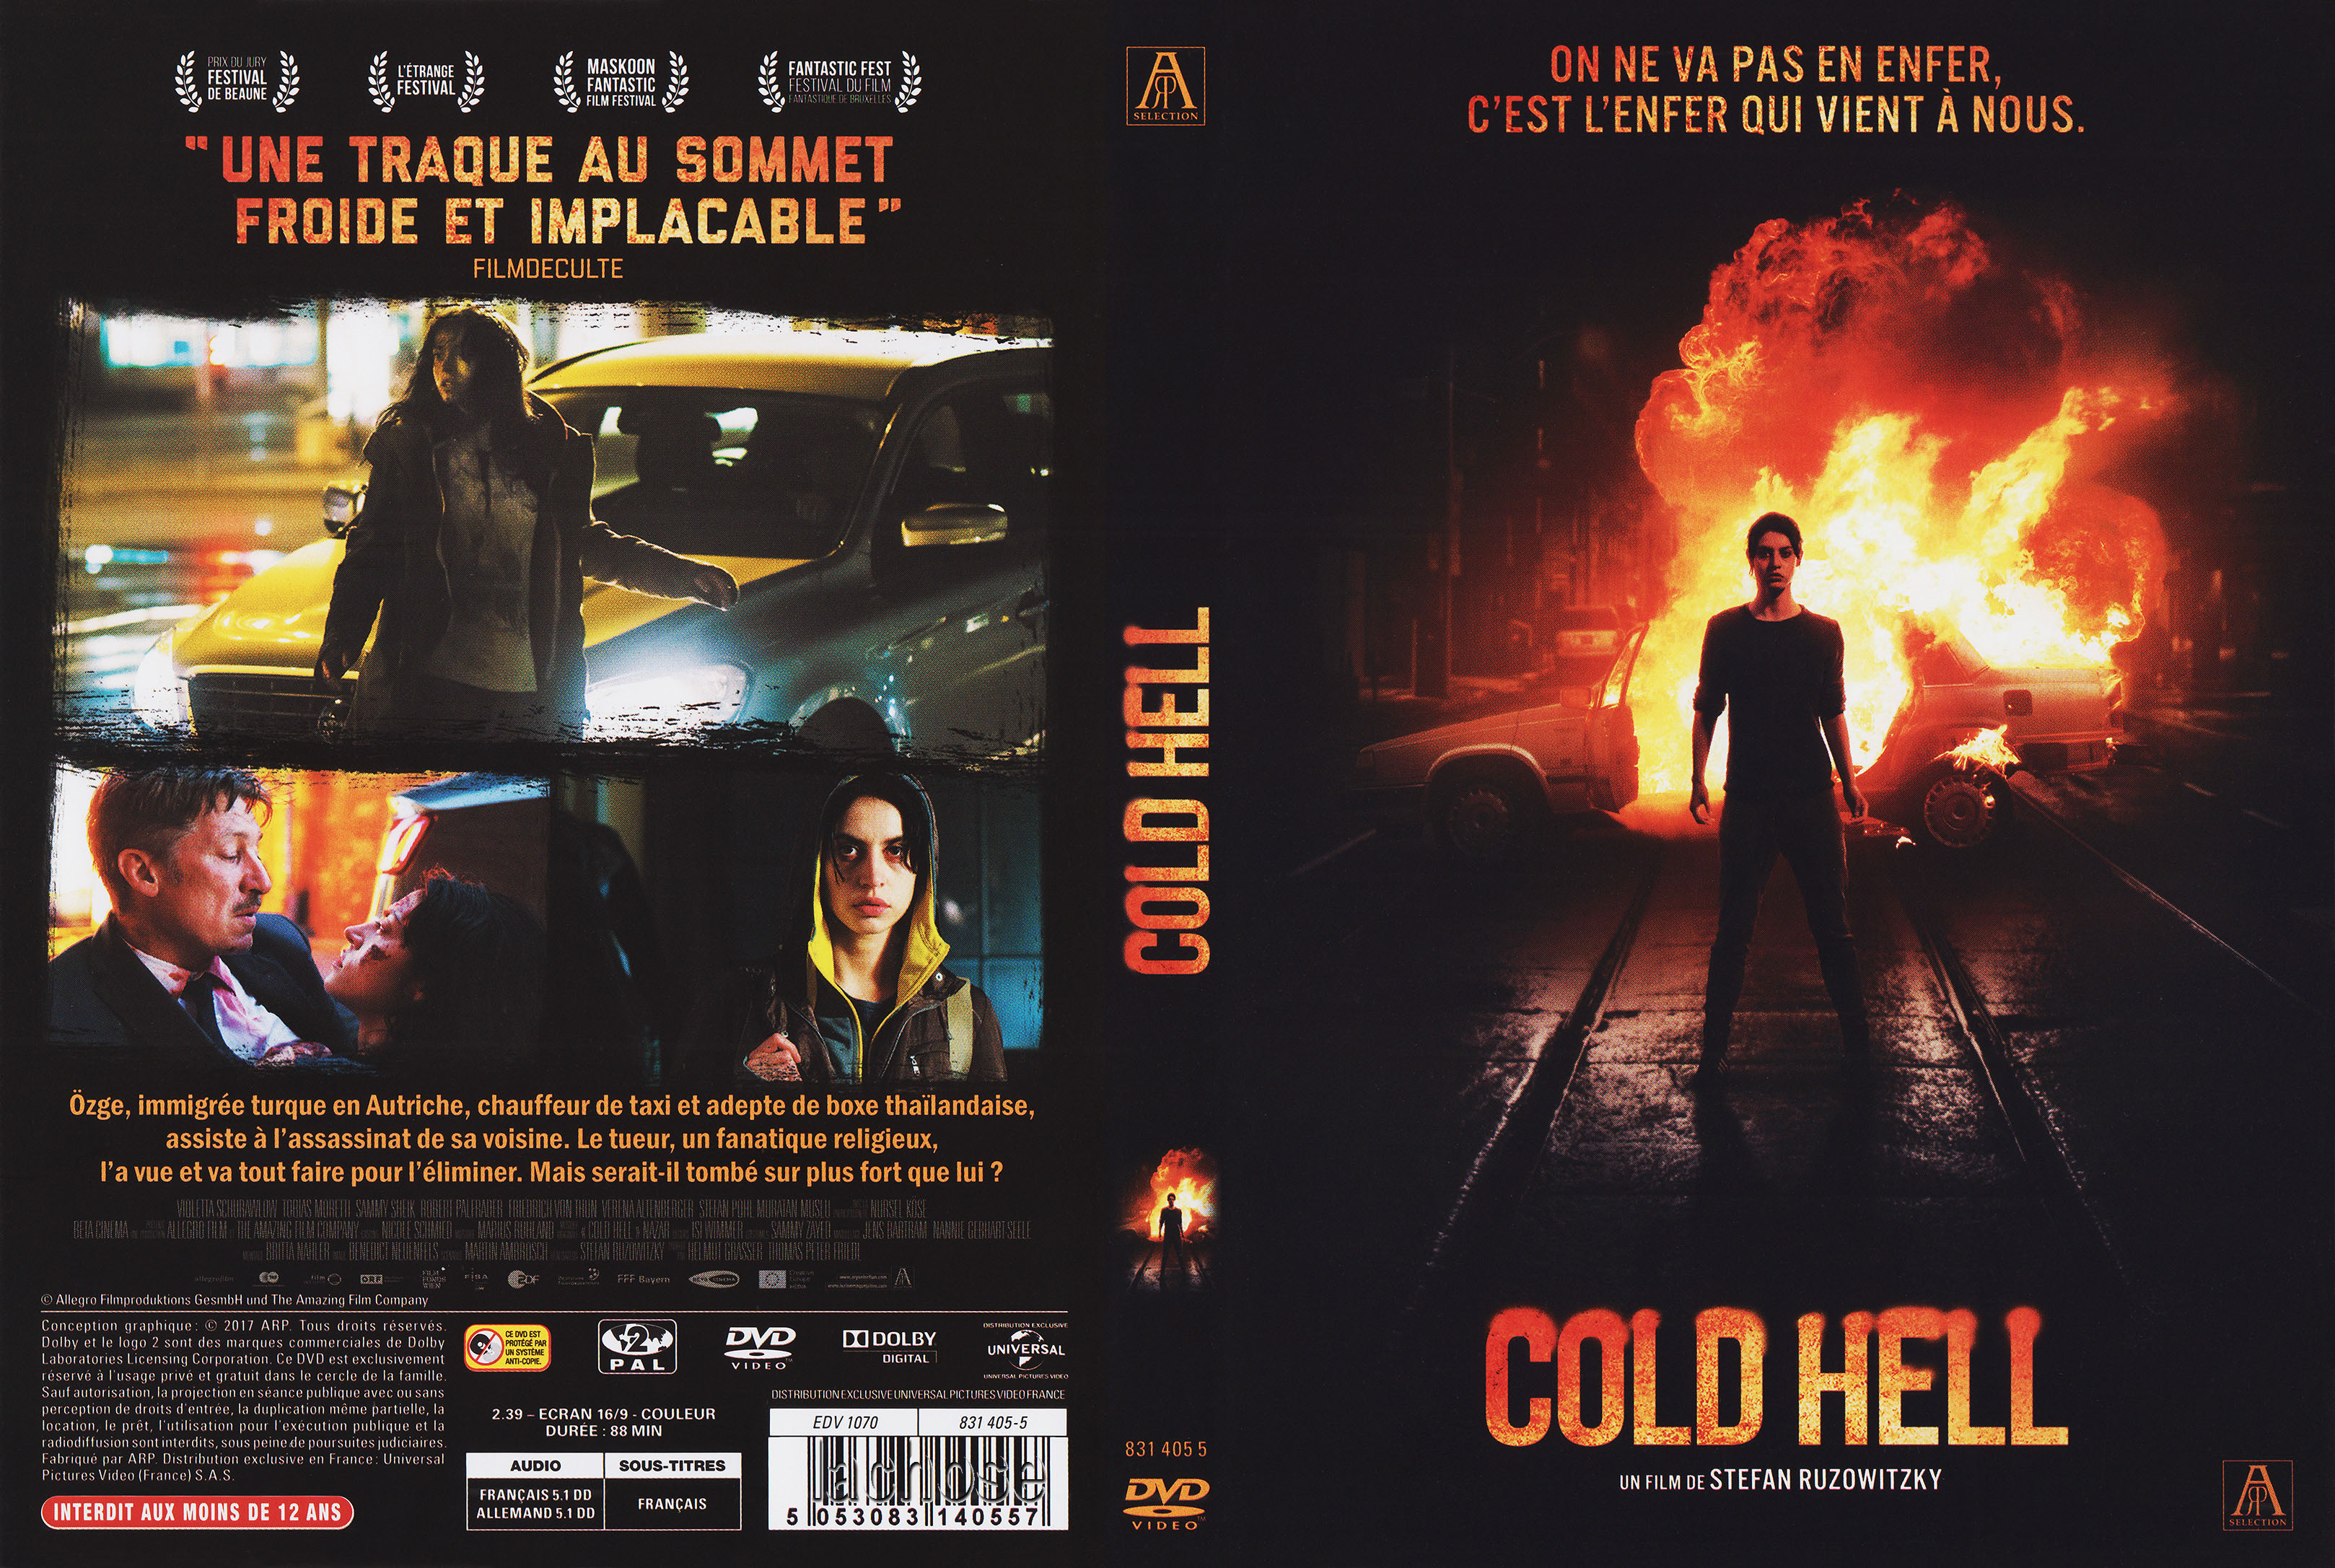 Jaquette DVD Cold hell